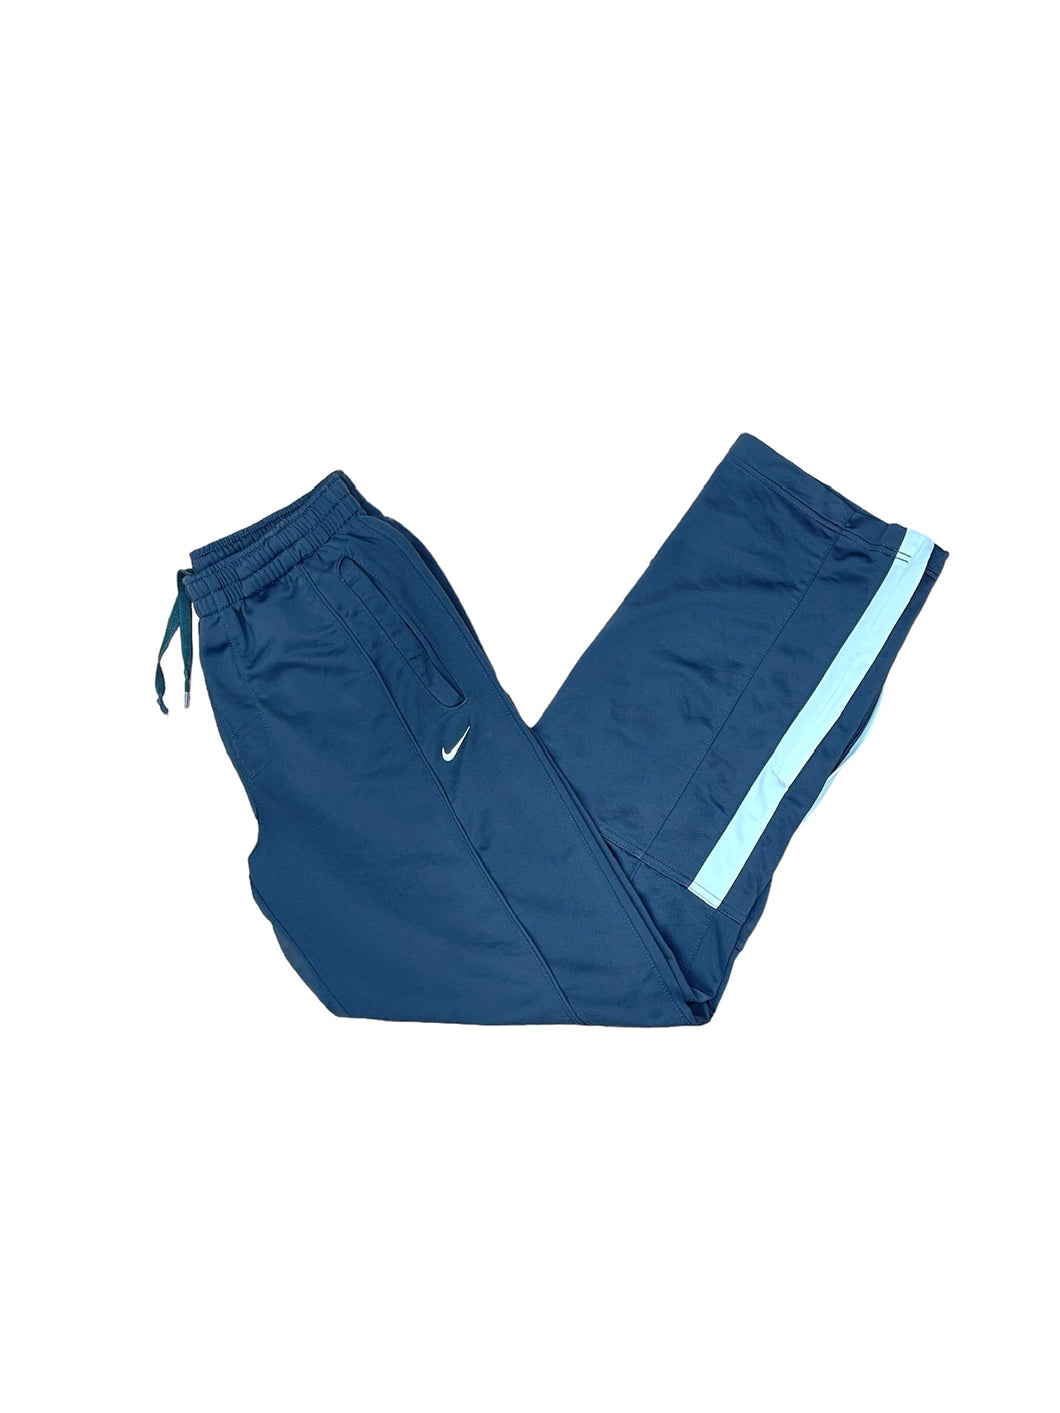 Nike Baggy Track Pant - Small